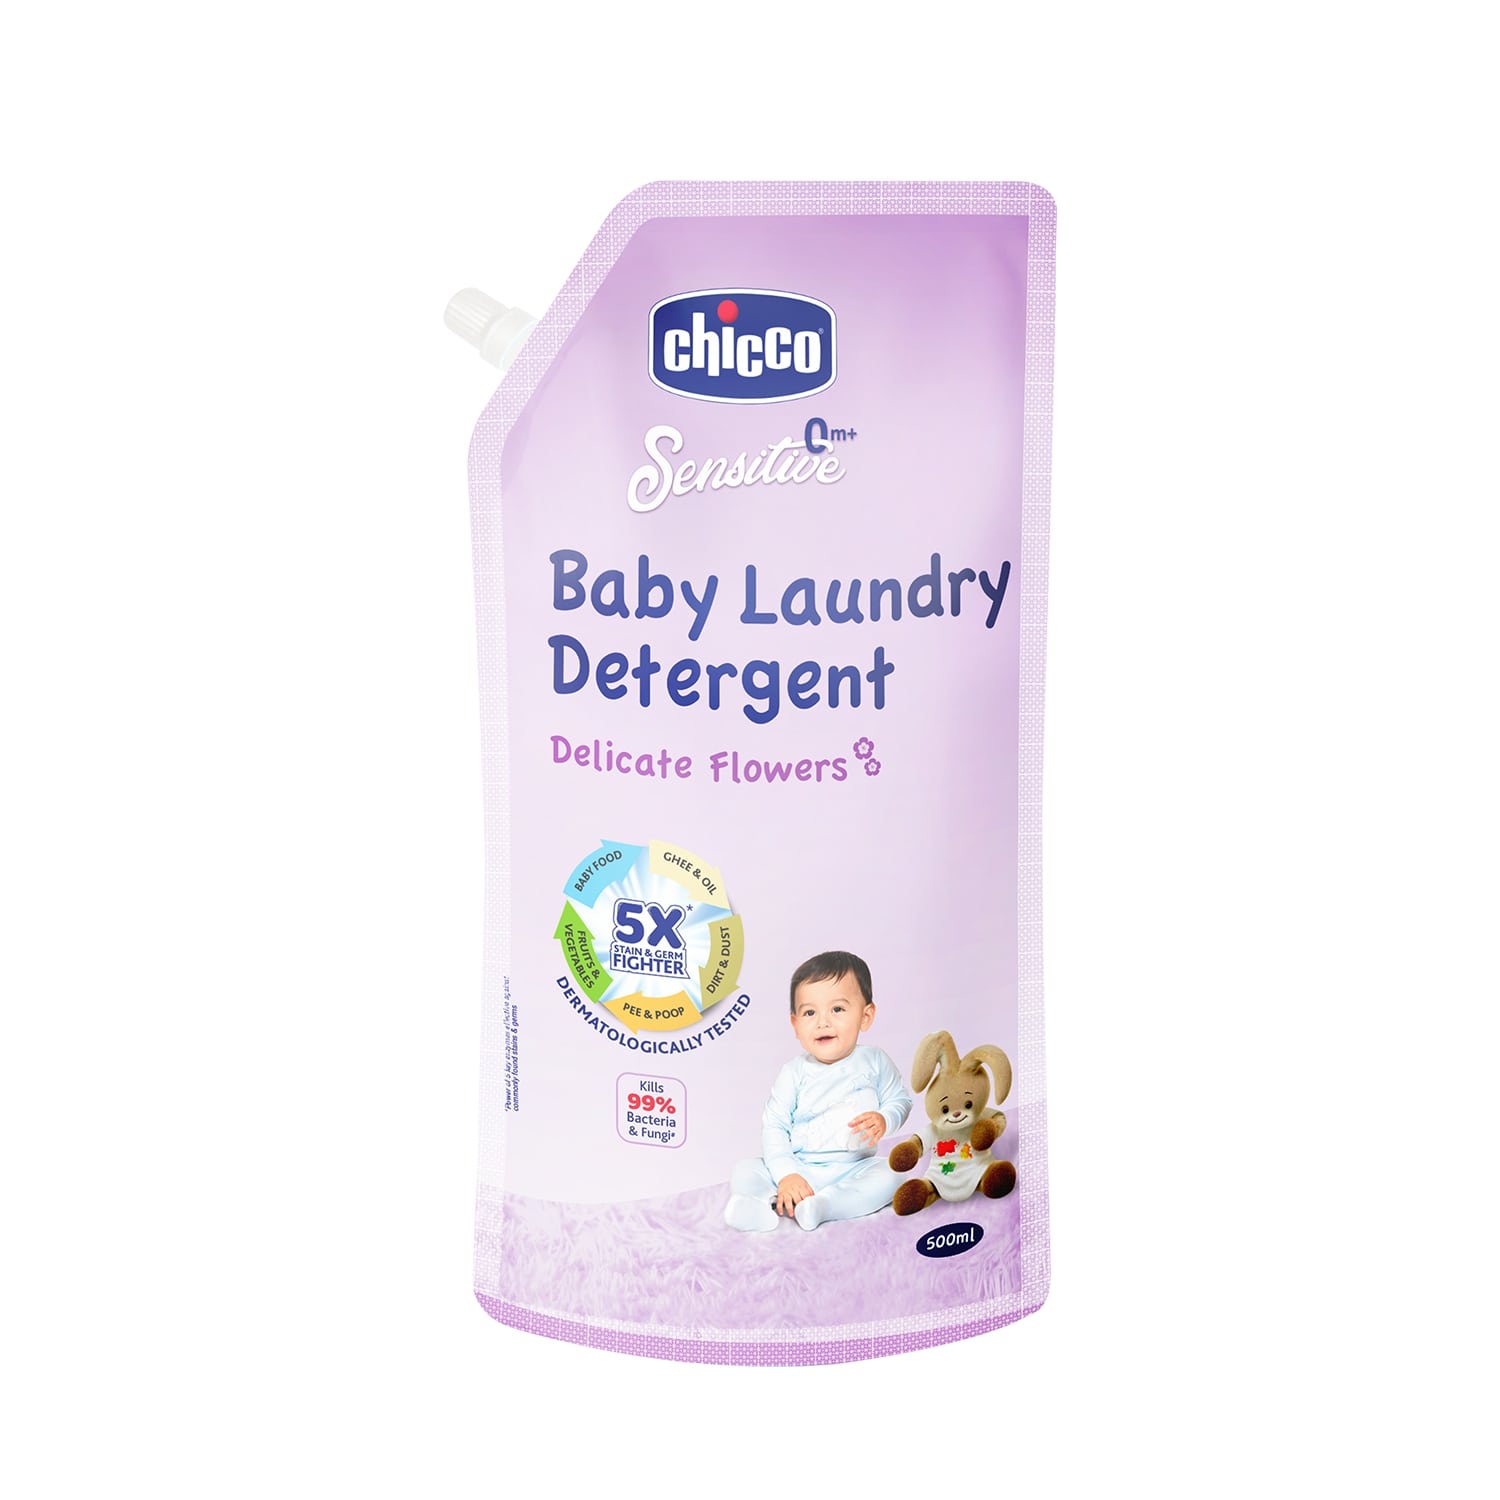 Baby Laundry Detergent (Delicate Flowers) (500ml)-Delicate Flowers